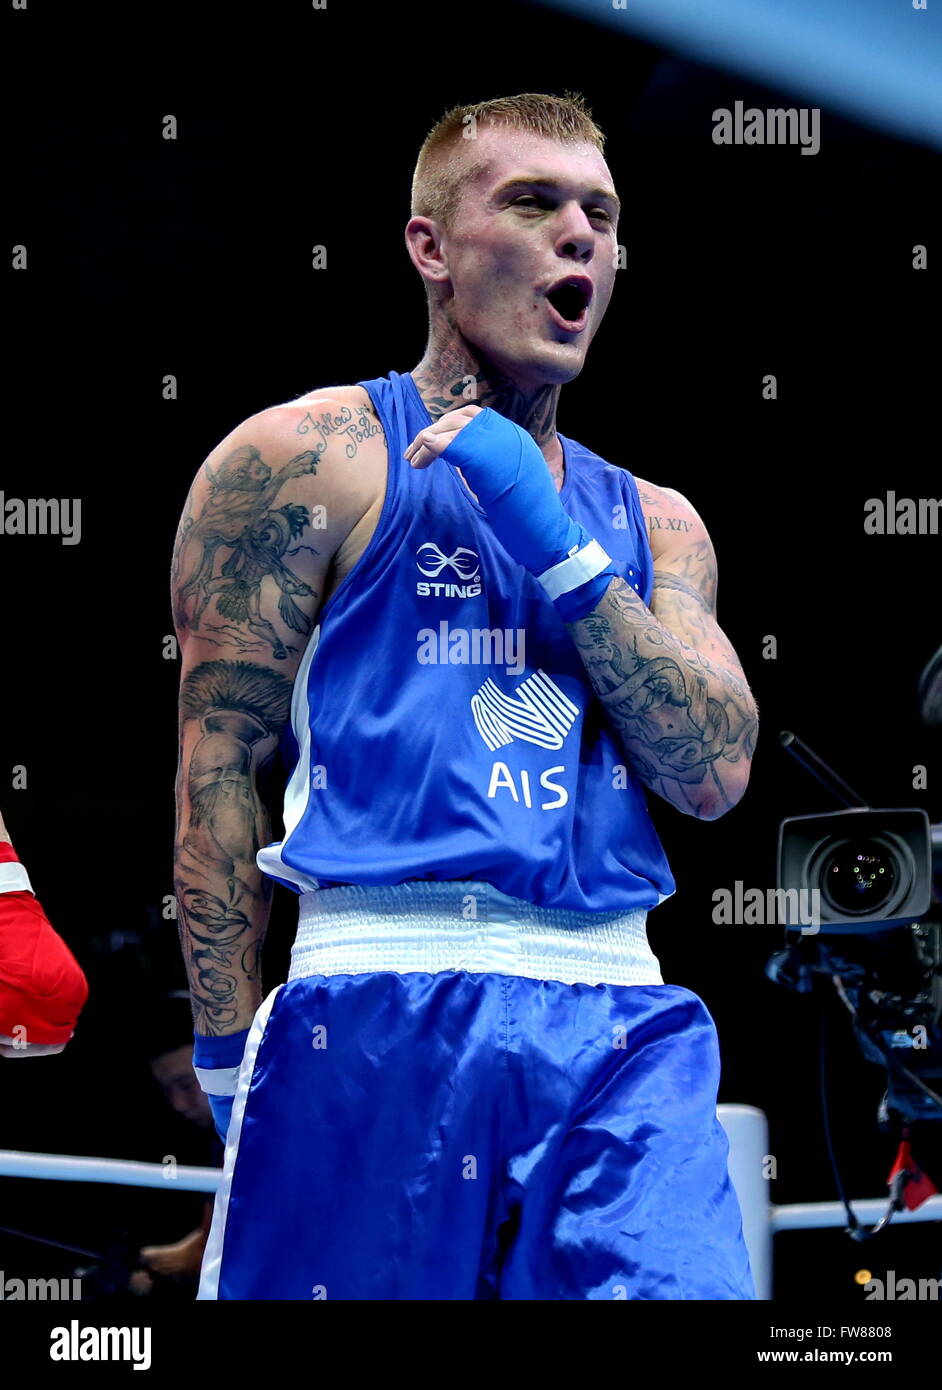 Qian'an, China's Hebei Province. 1st Apr, 2016. Daniel Jason Lewis of Australia celebrates during the bronze medal match against Shinebayar Narmandakh of Mongolia in the men's 75kg category competition at the Asia/Oceania Zone boxing event qualifier for 2016 Rio Olympic Games in Qian'an, north China's Hebei Province, April 1, 2016. Lewis won 3-0. Credit:  Yang Shiyao/Xinhua/Alamy Live News Stock Photo